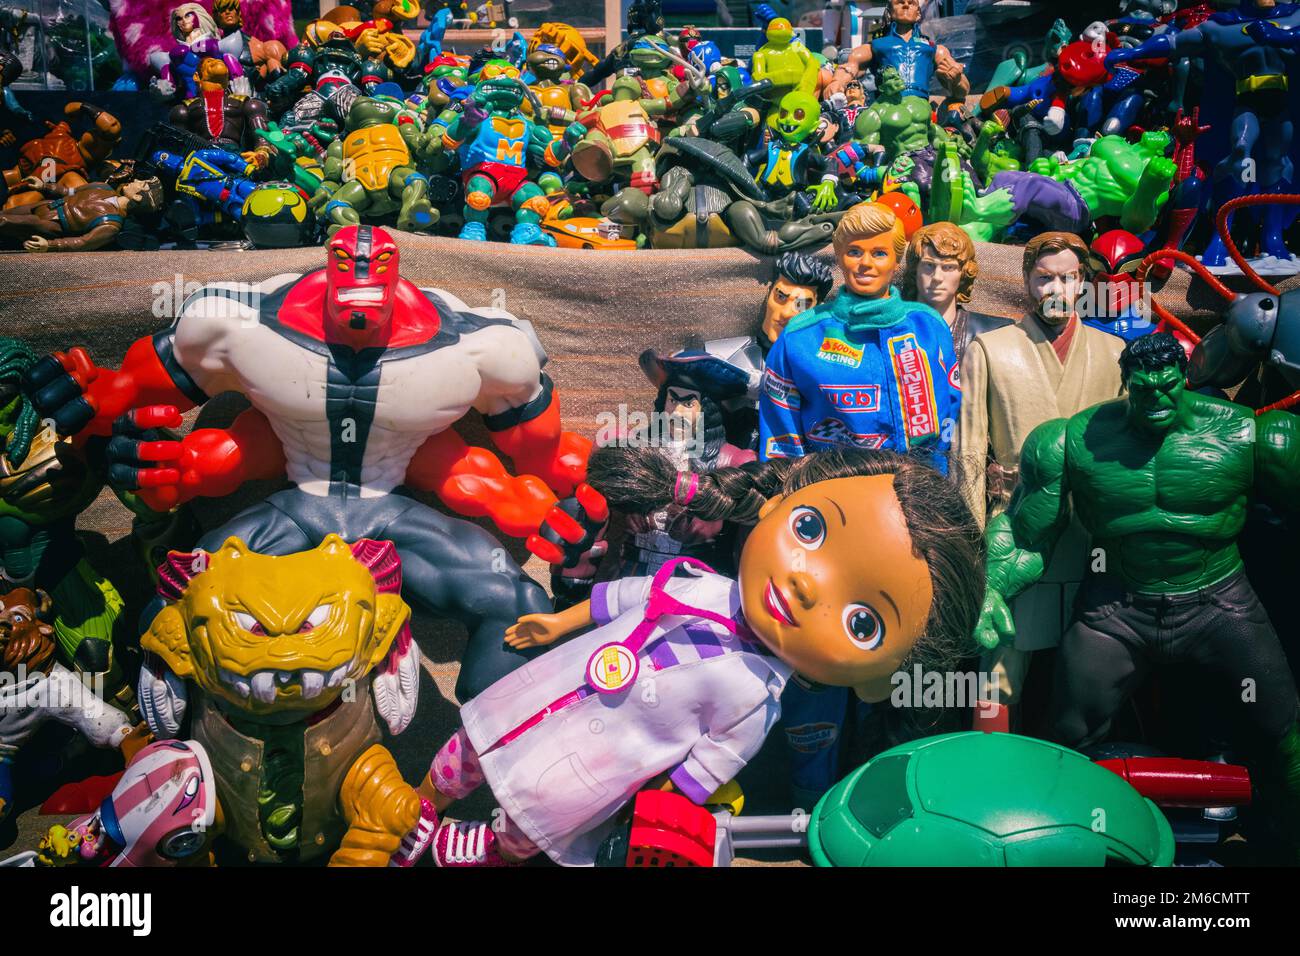 Action figure of cartoons and movie characters. Stock Photo